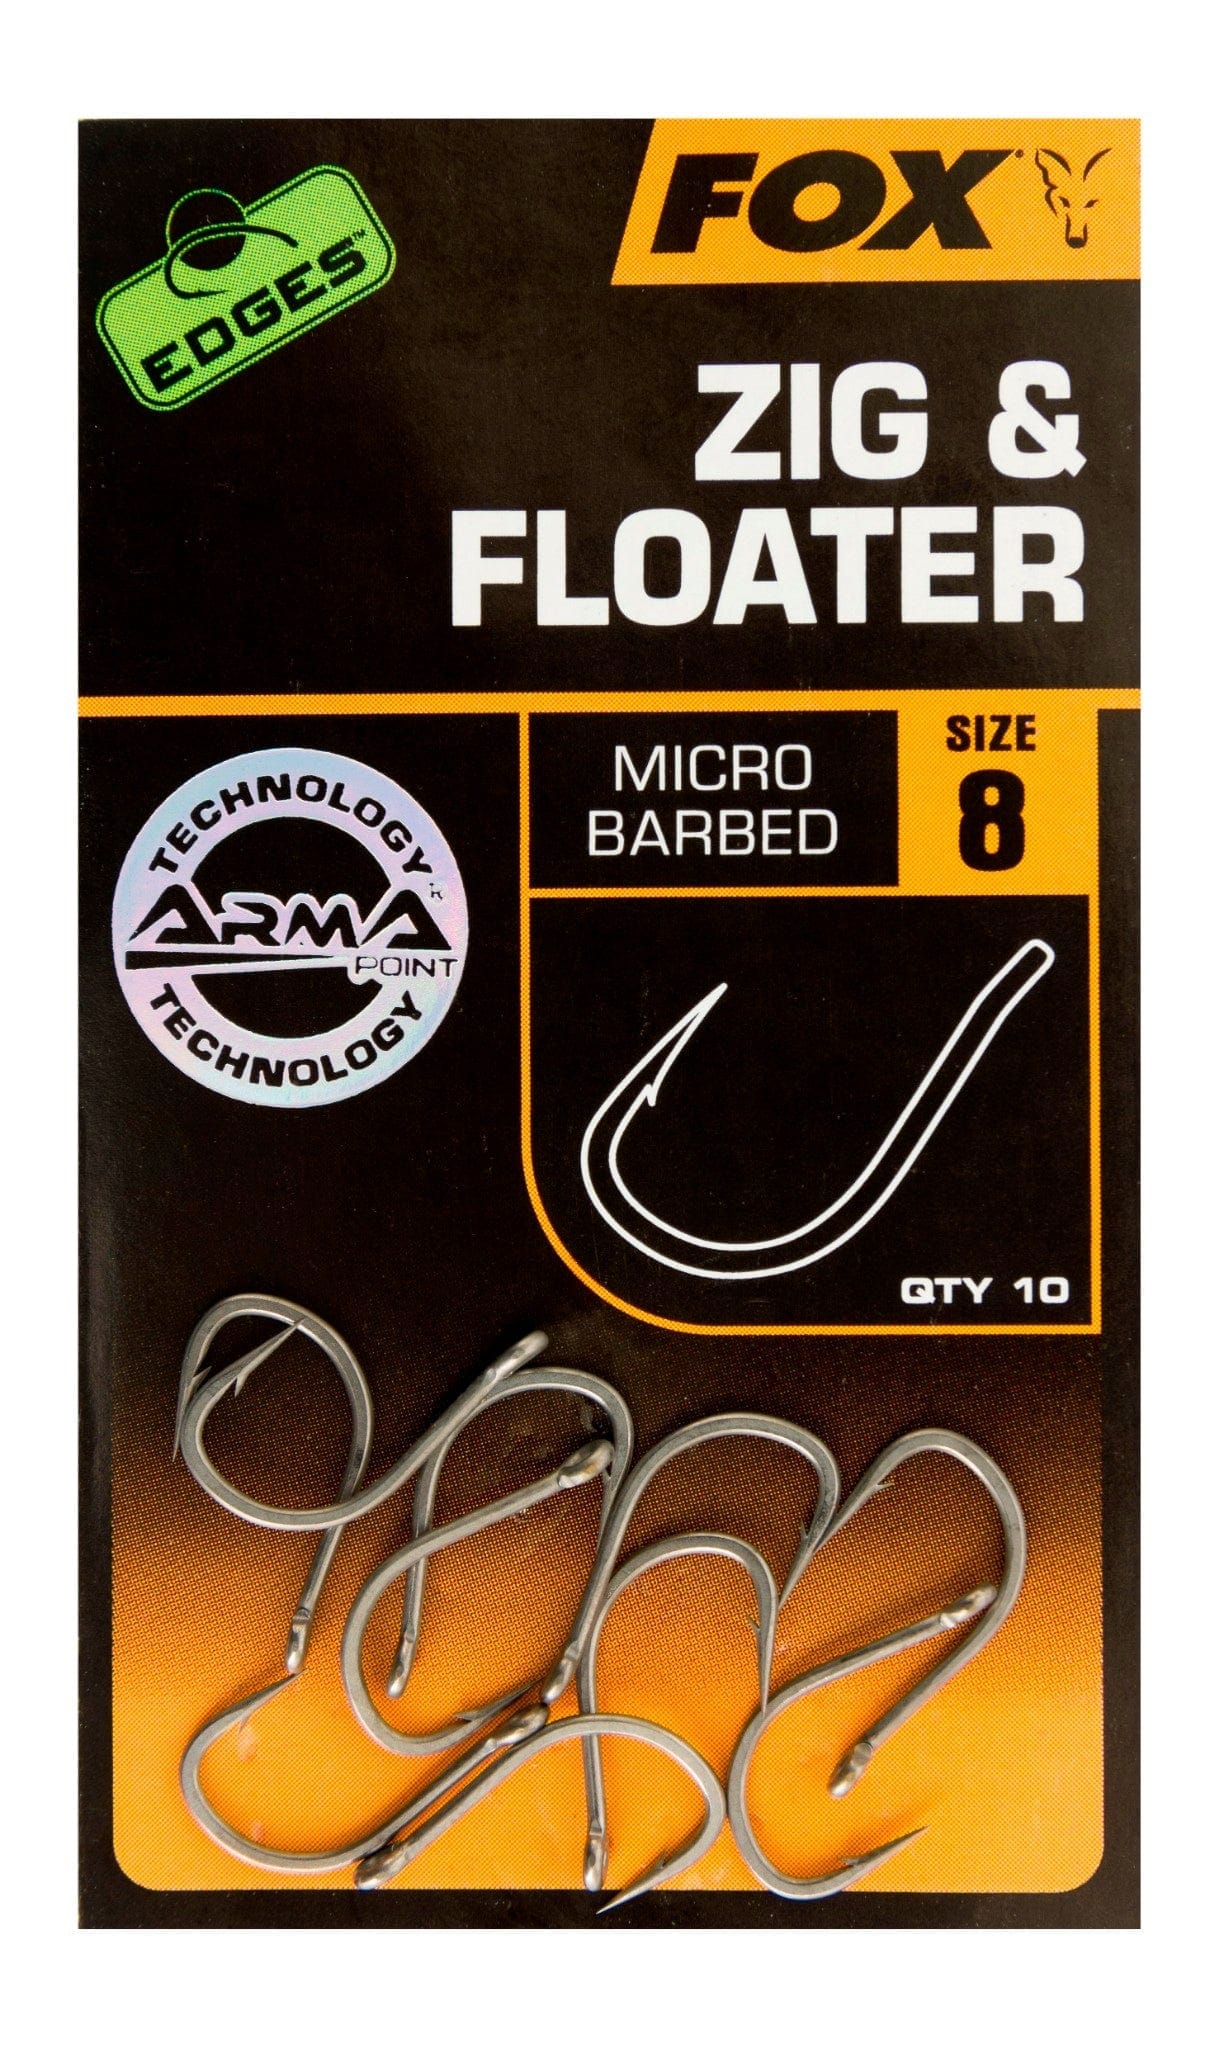 FOX Edges Armapoint Zig & Floater Hooks - All Sizes (Micro Barbed).